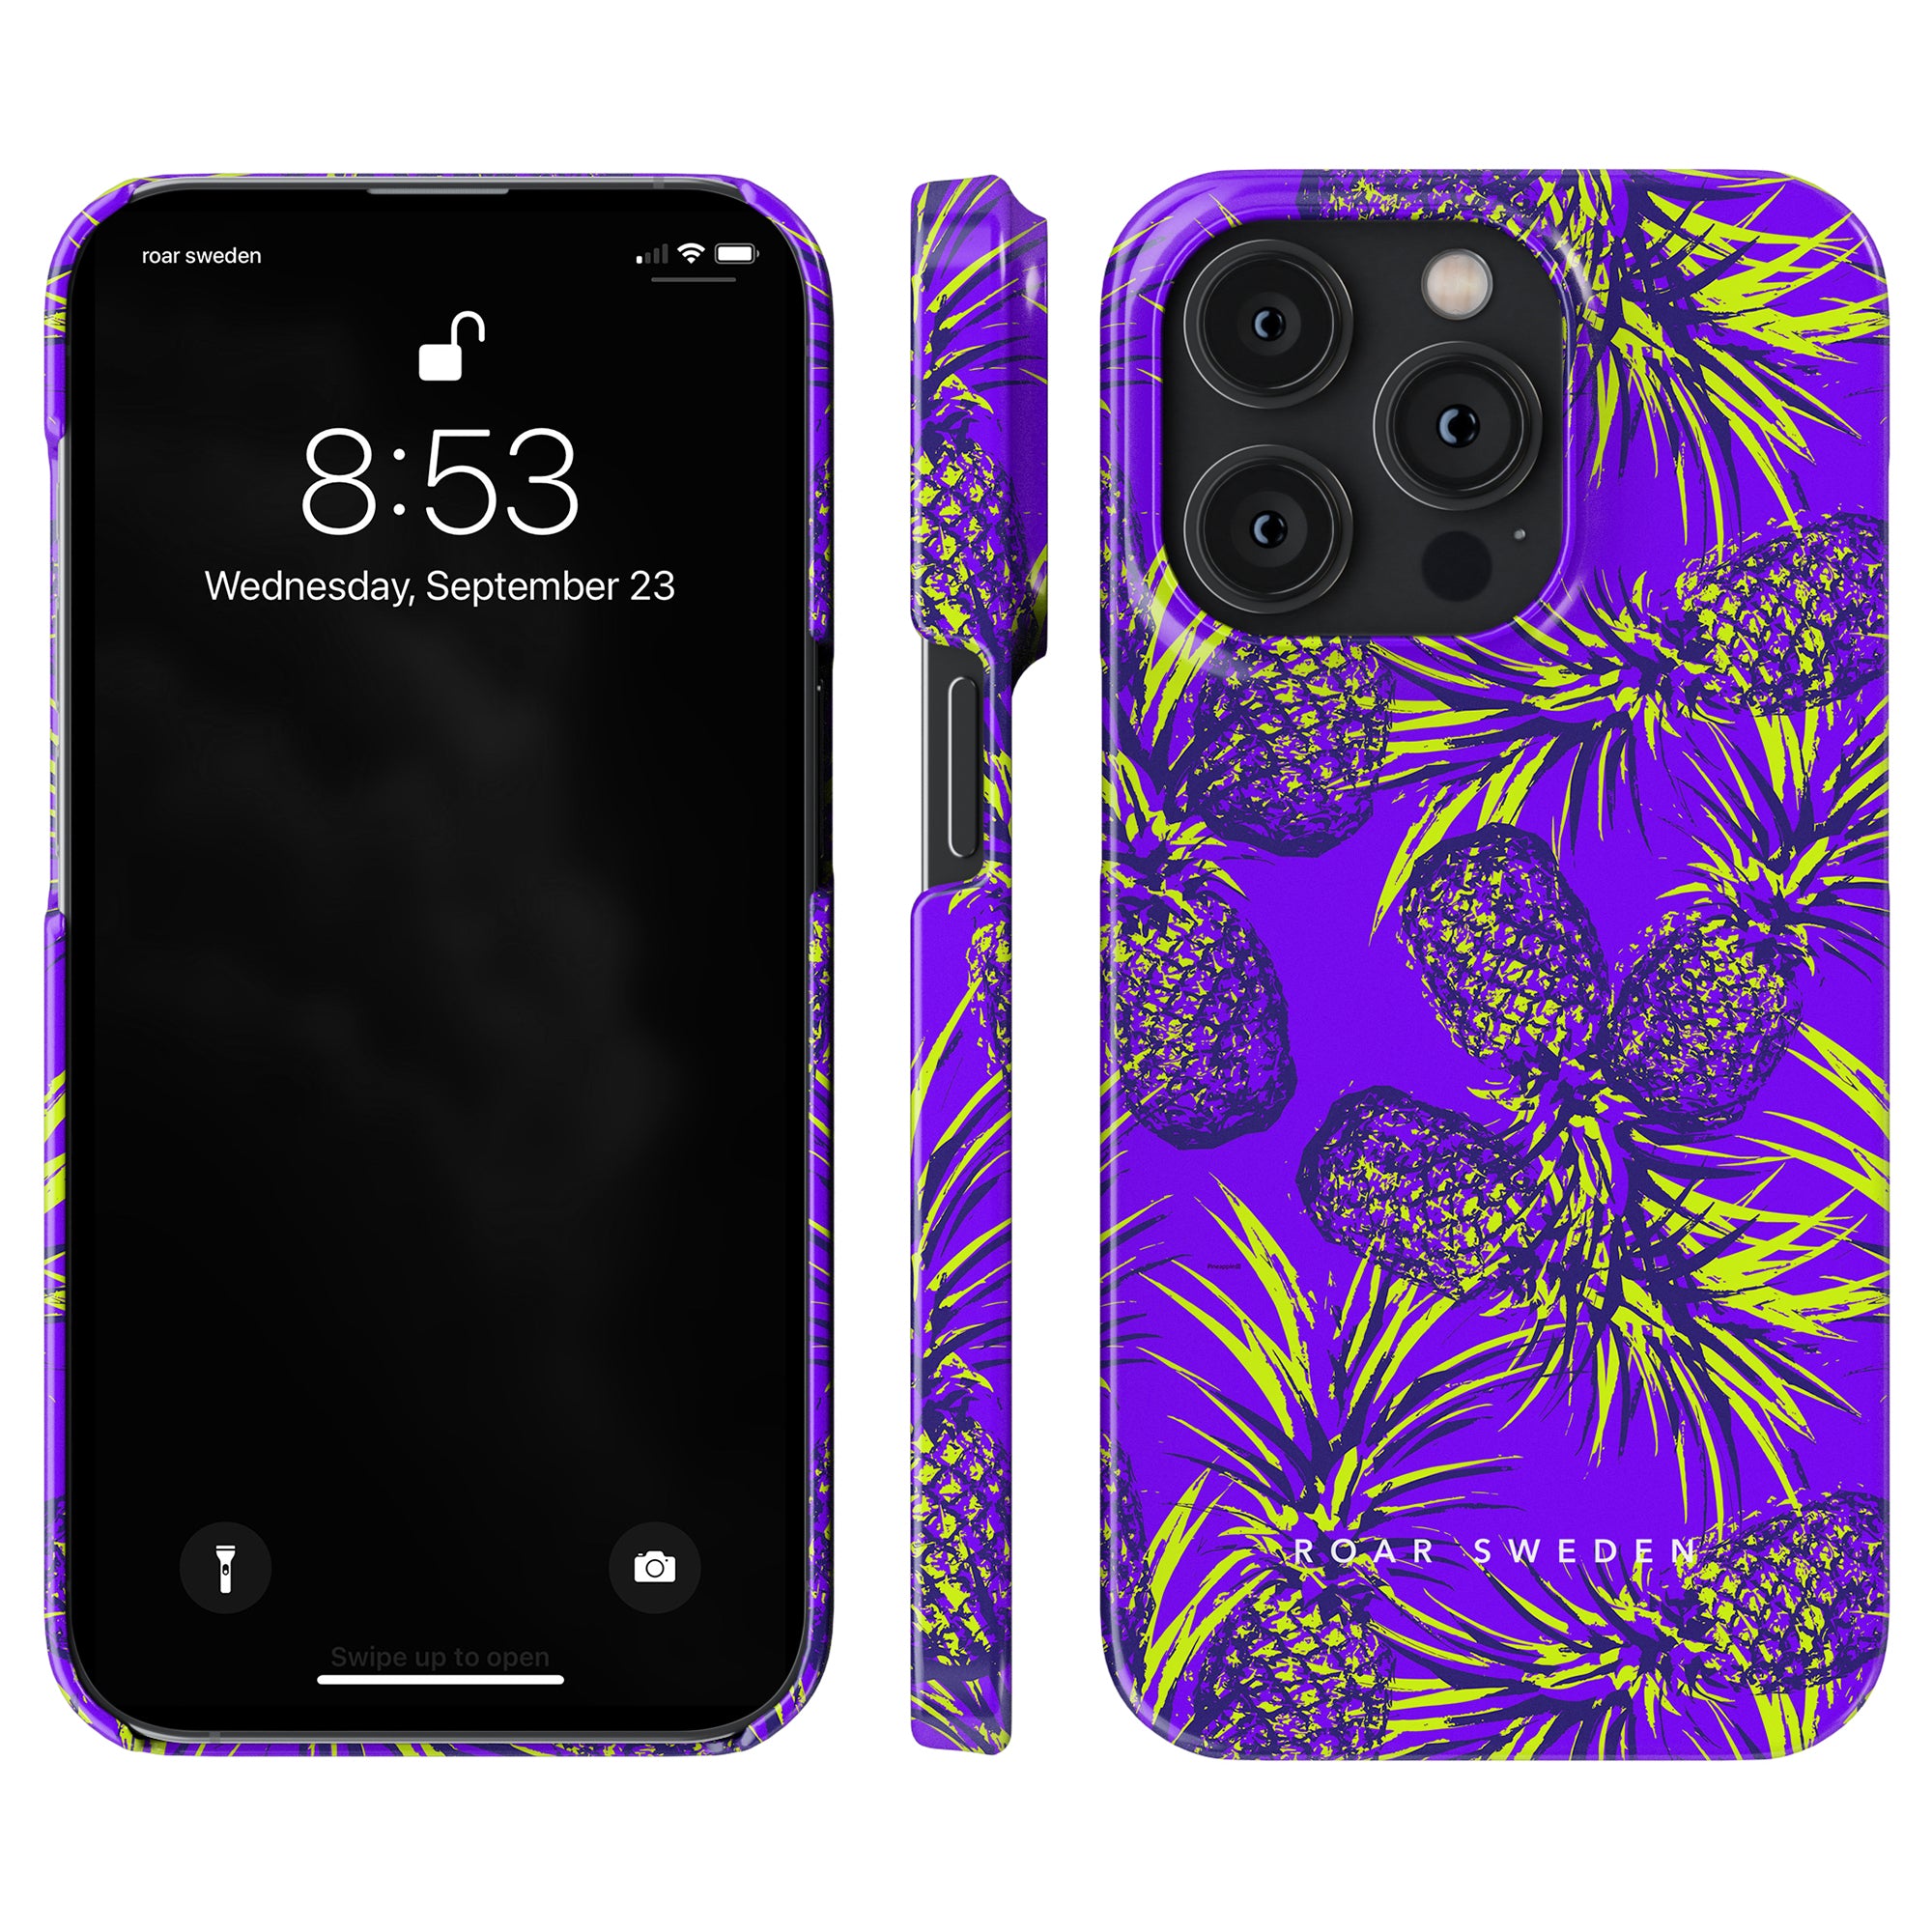 Enhance your device with our SEO-optimized Comosus - Slim case: a smartphone adorned with a vibrant purple and yellow pineapple-themed case.